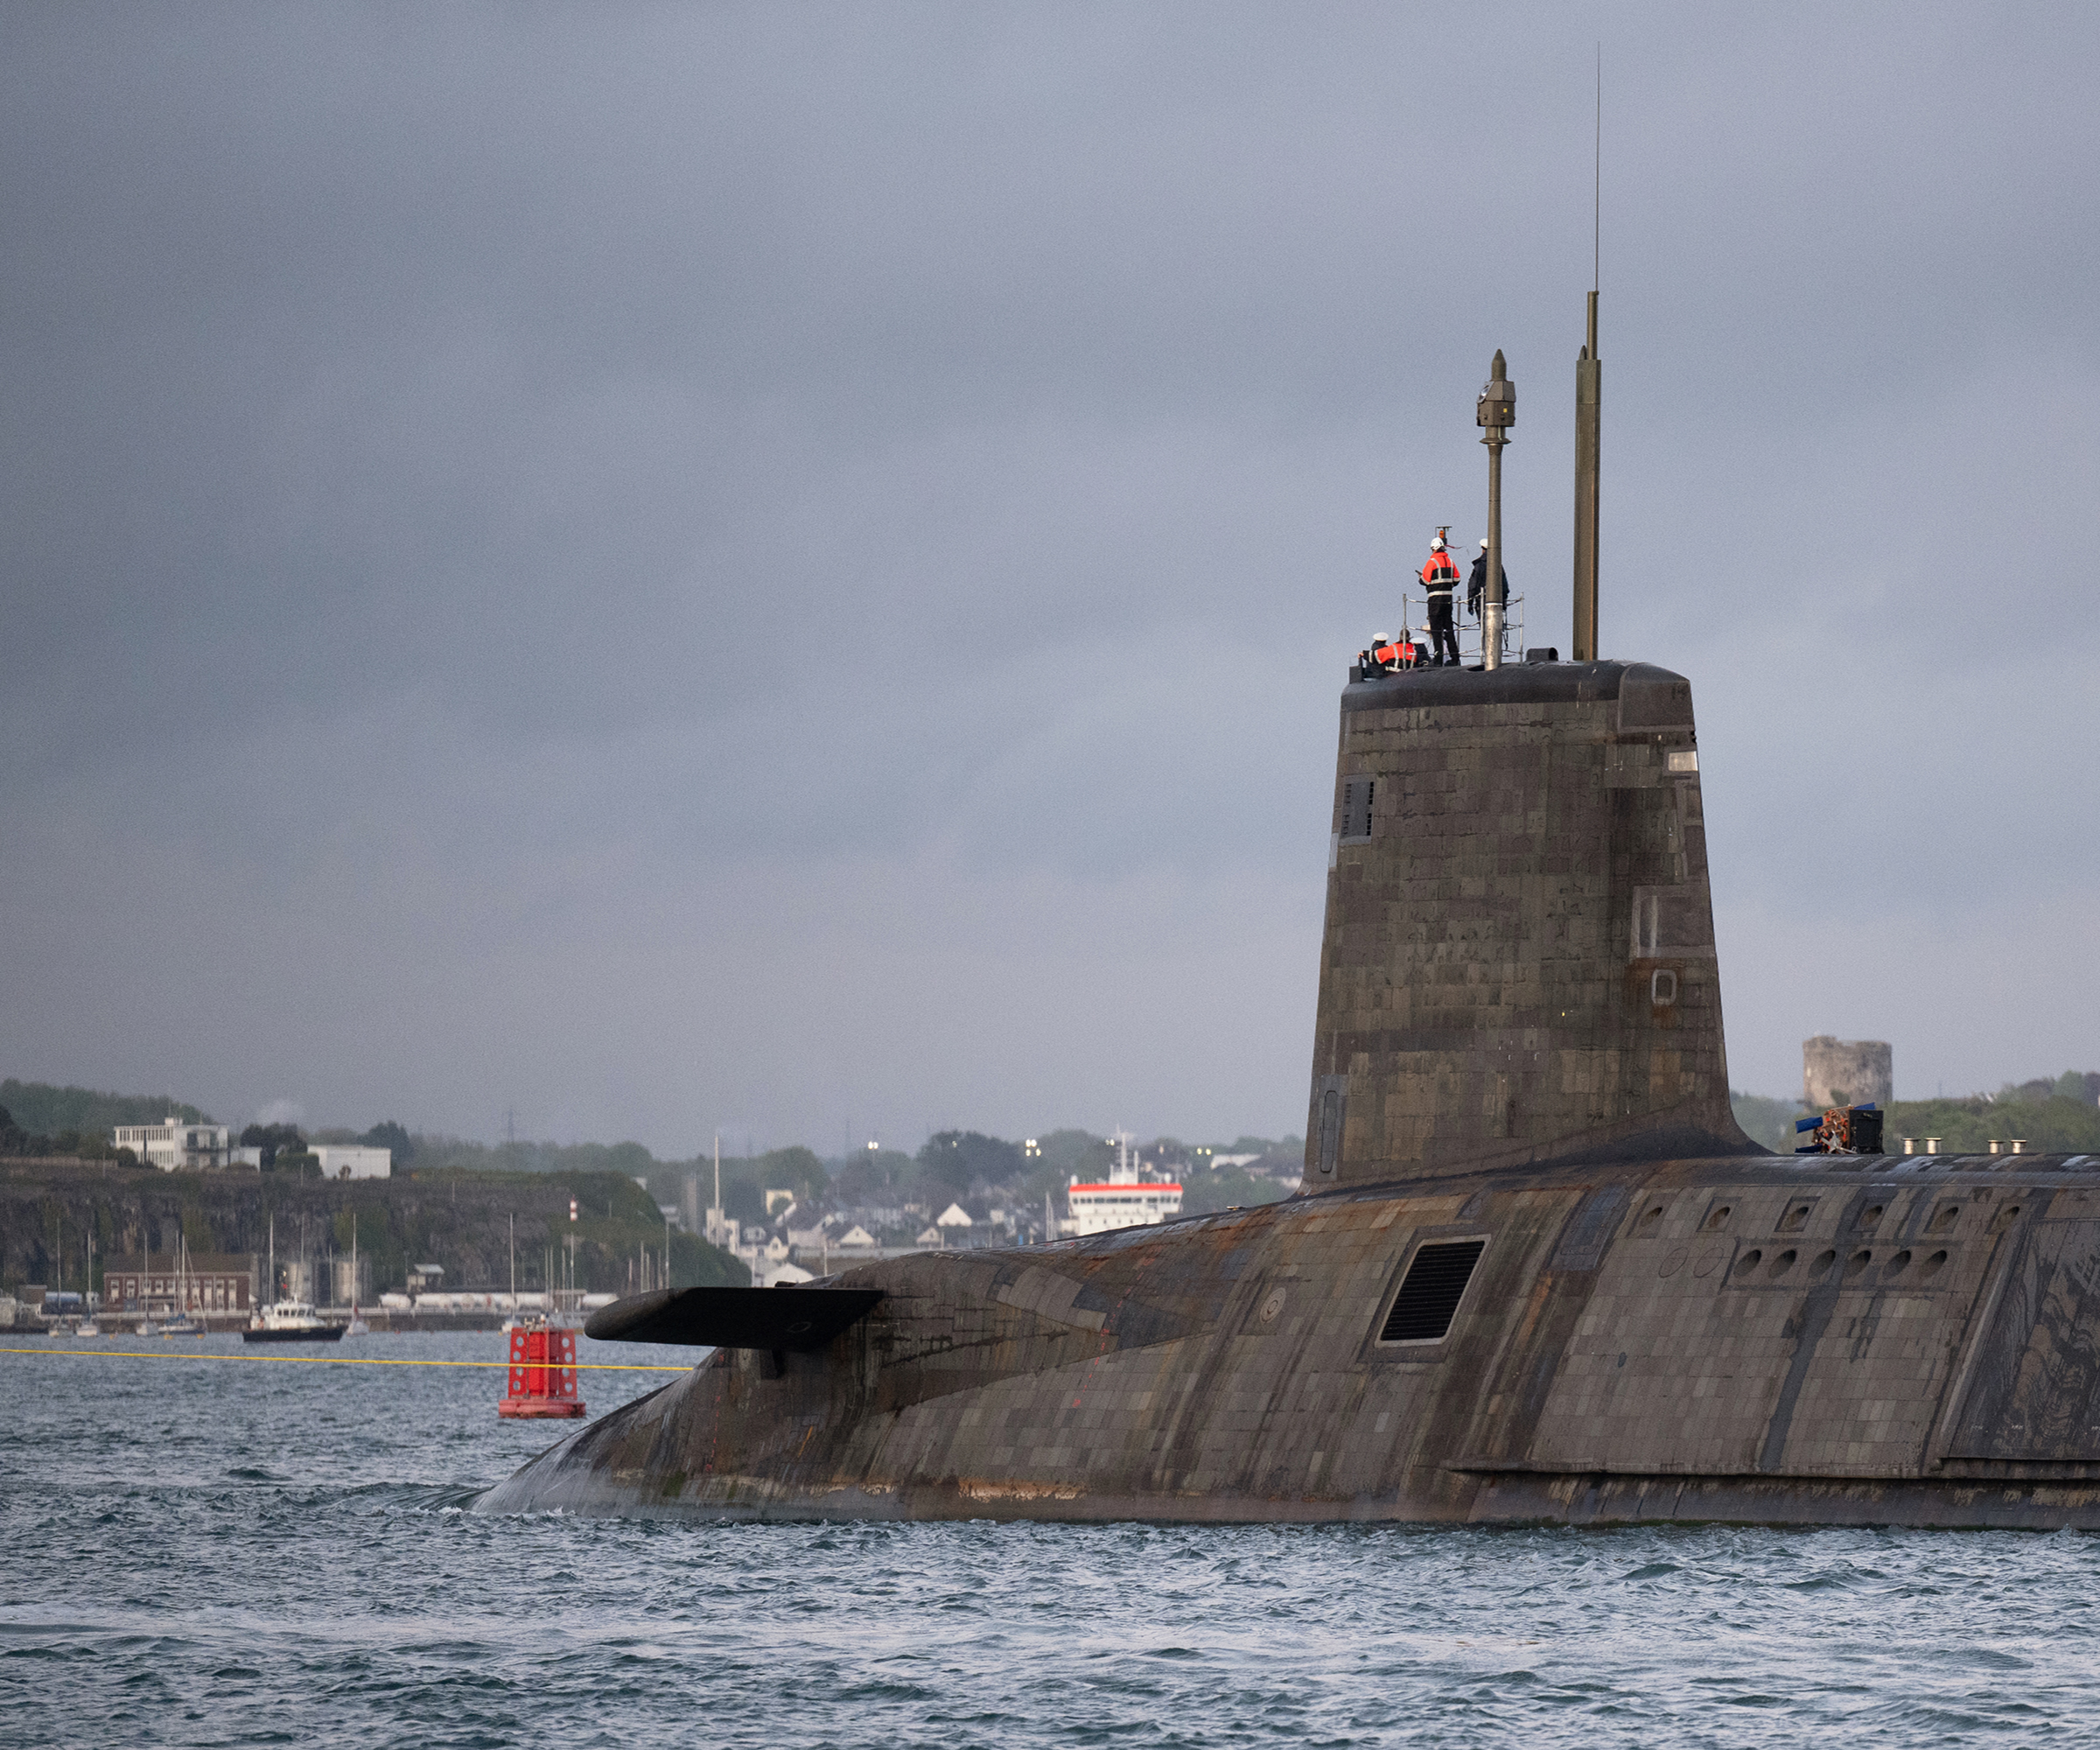 Britain’s nuclear-powered submarine HMS Vanguard departing Devonport in 2023 after a seven and a half year refit. Photo: Andrew Linnett, courtesy of the UK Ministry of Defence.